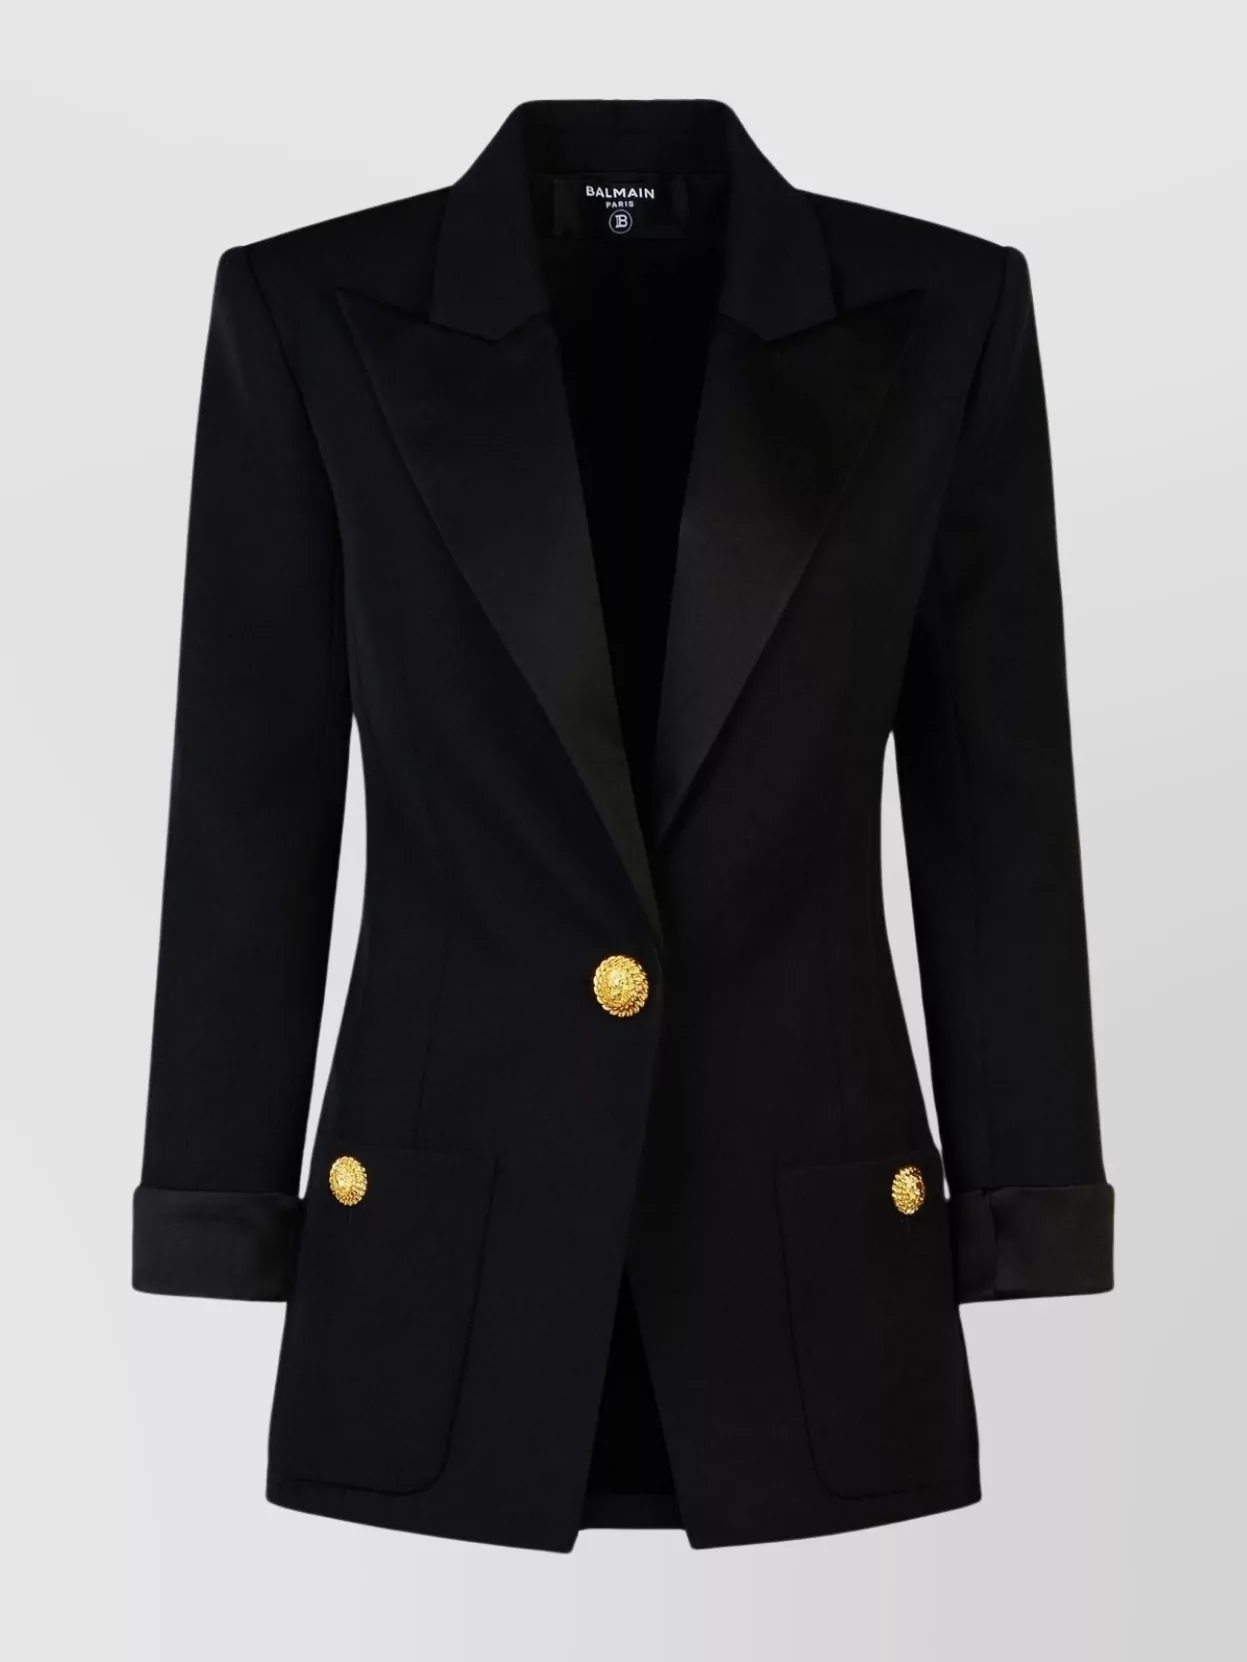 Balmain Tailored Wool Blazer With Structured Shoulders In Black